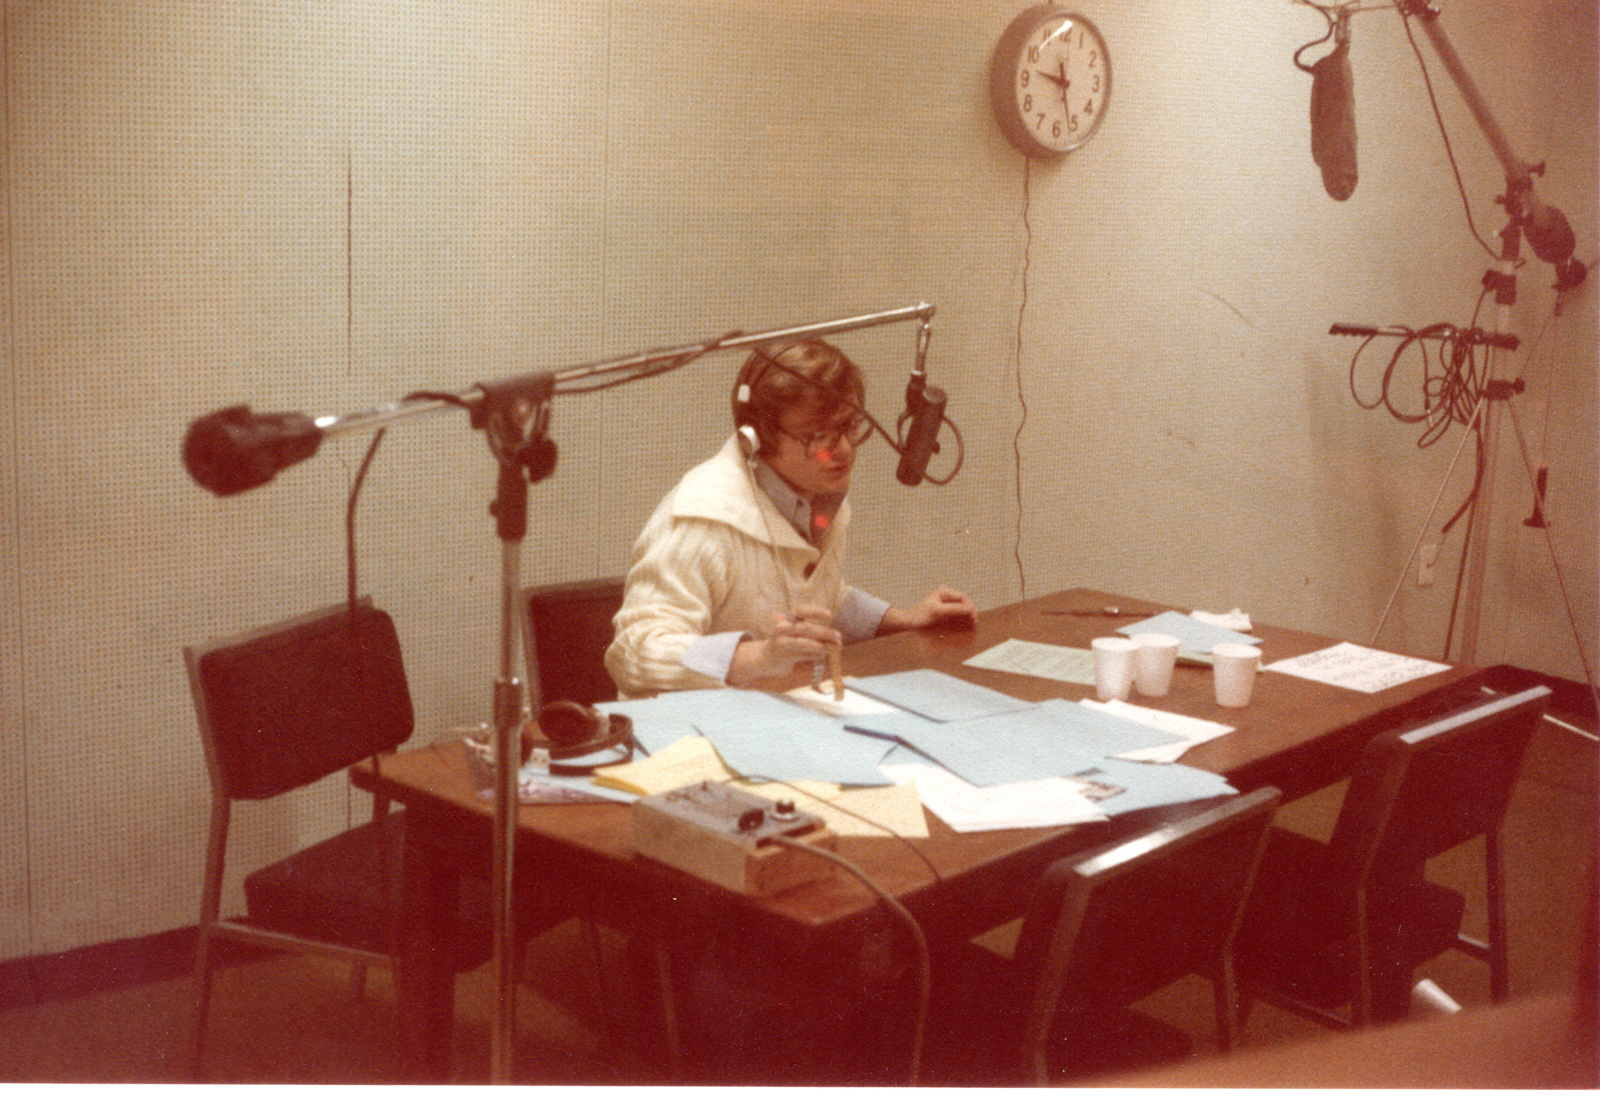 Mike Blishak in Studio A - The room was more empty back in 78